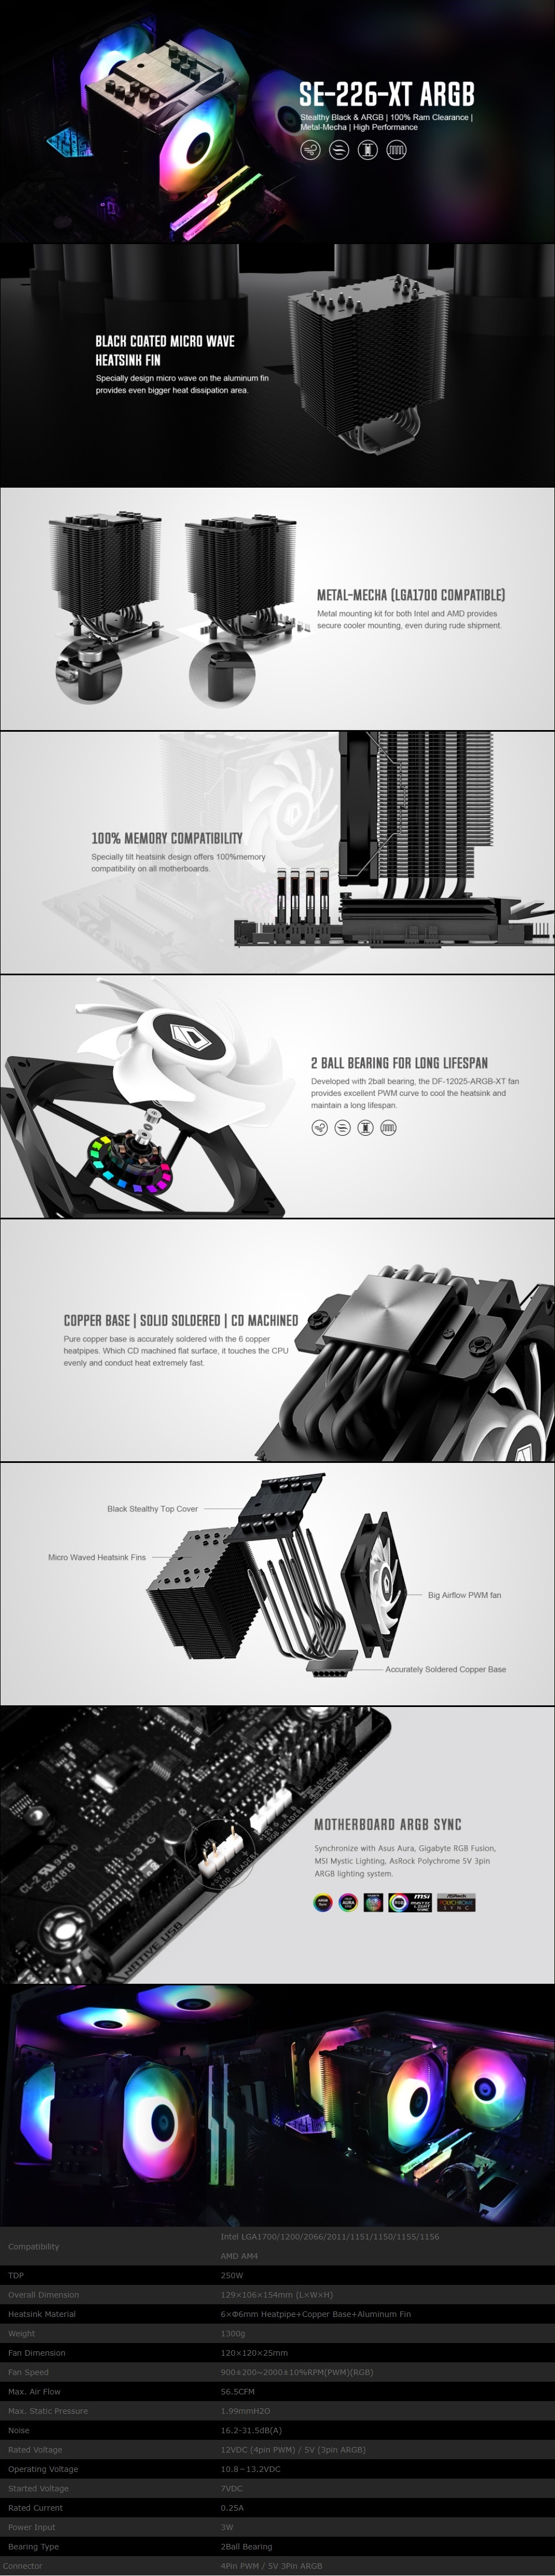 A large marketing image providing additional information about the product ID-COOLING Sweden Series SE-226-XT ARGB CPU Cooler - Additional alt info not provided